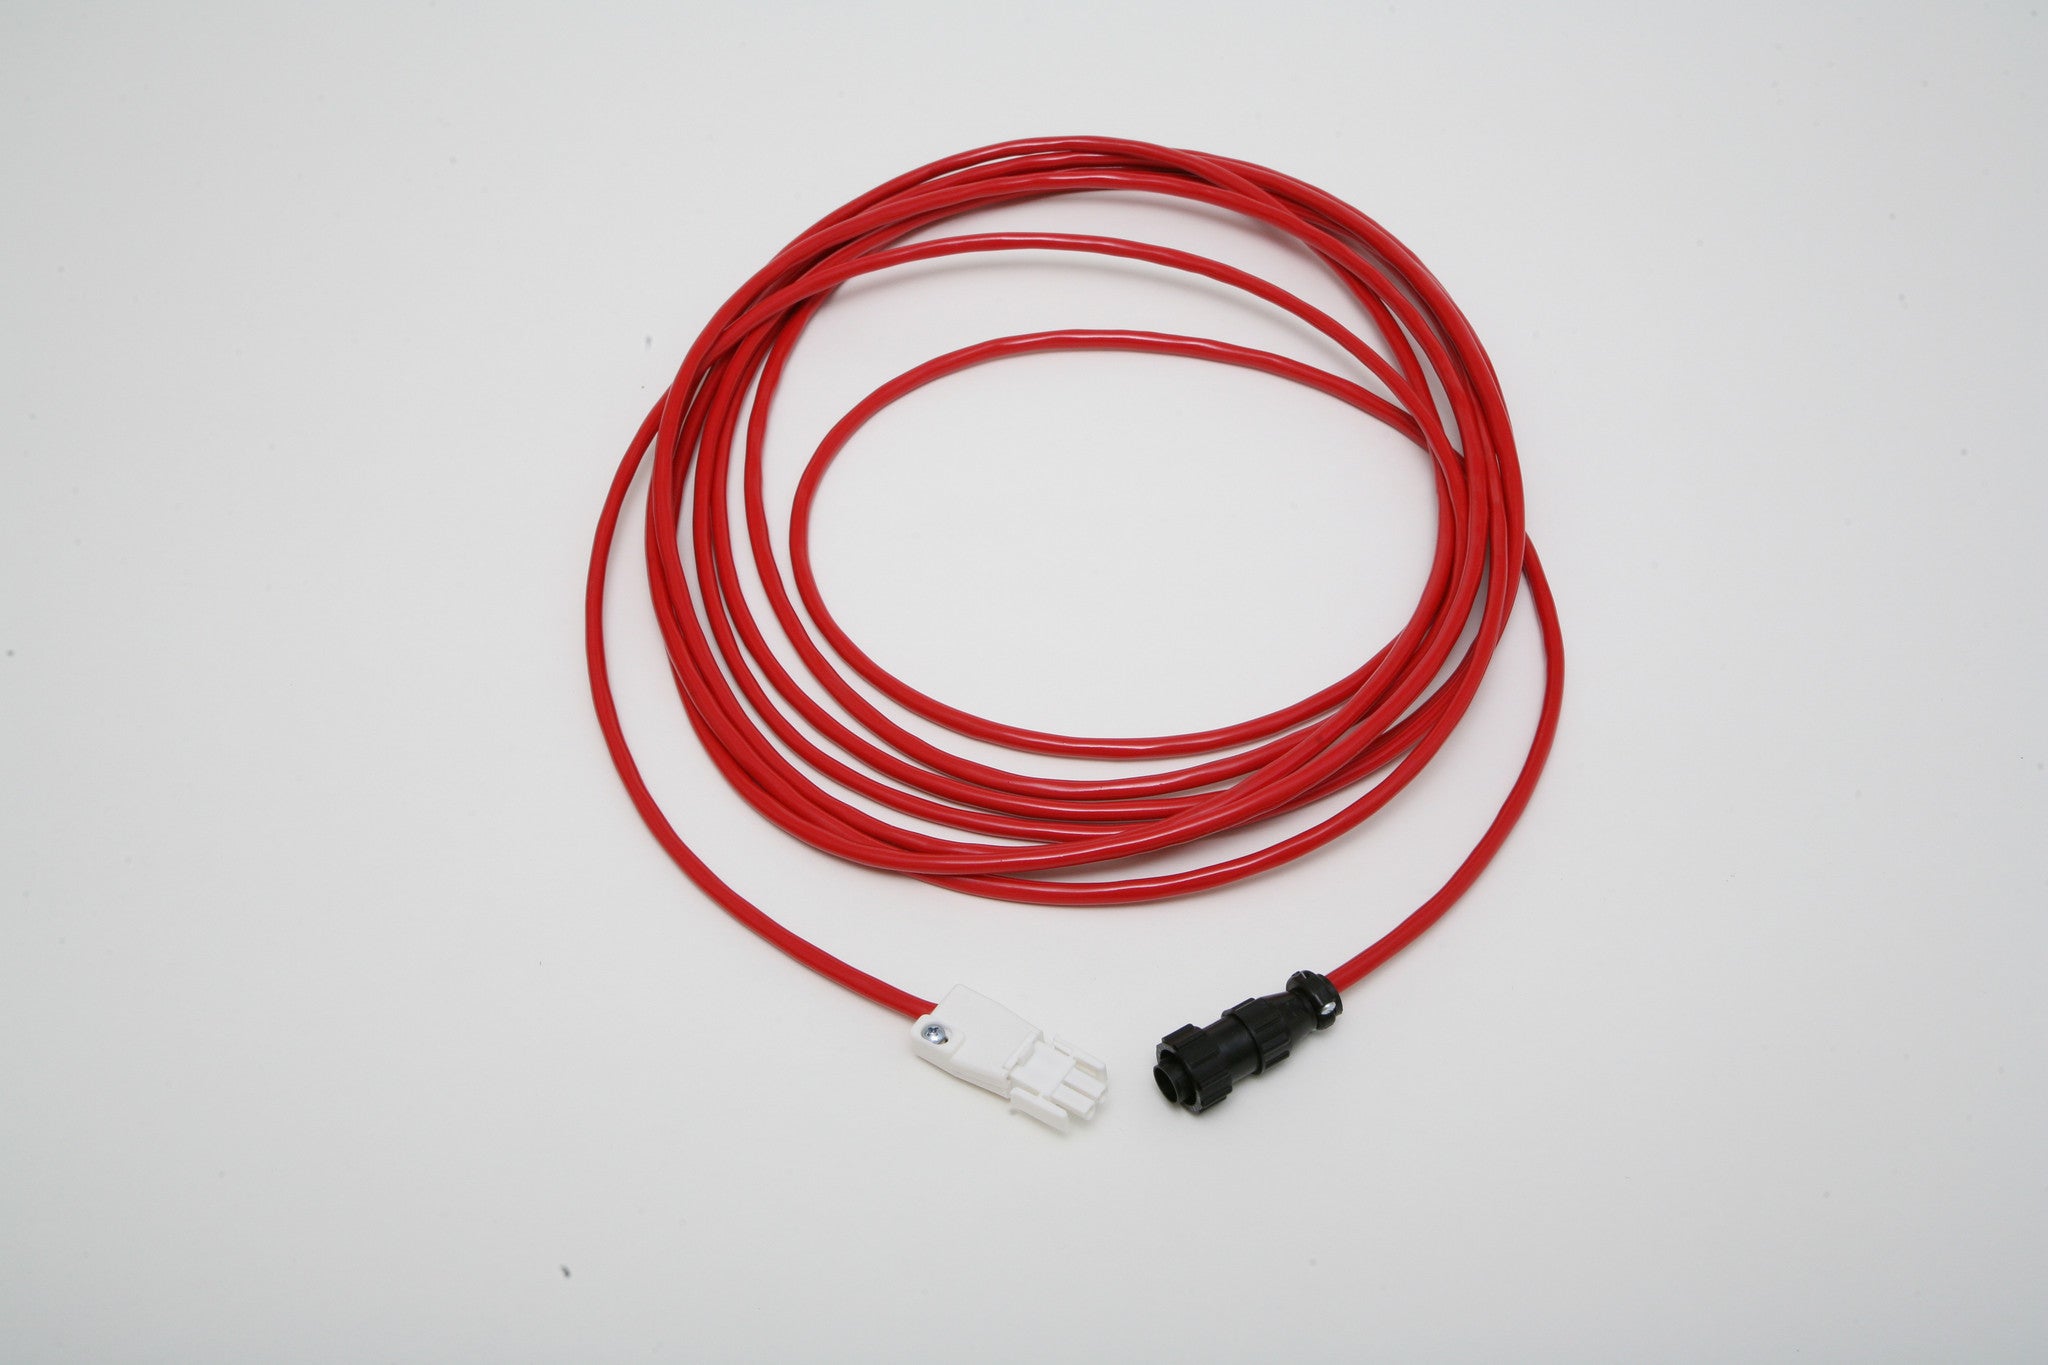 SUN B.A.R 97 RED ANTENNA CABLE